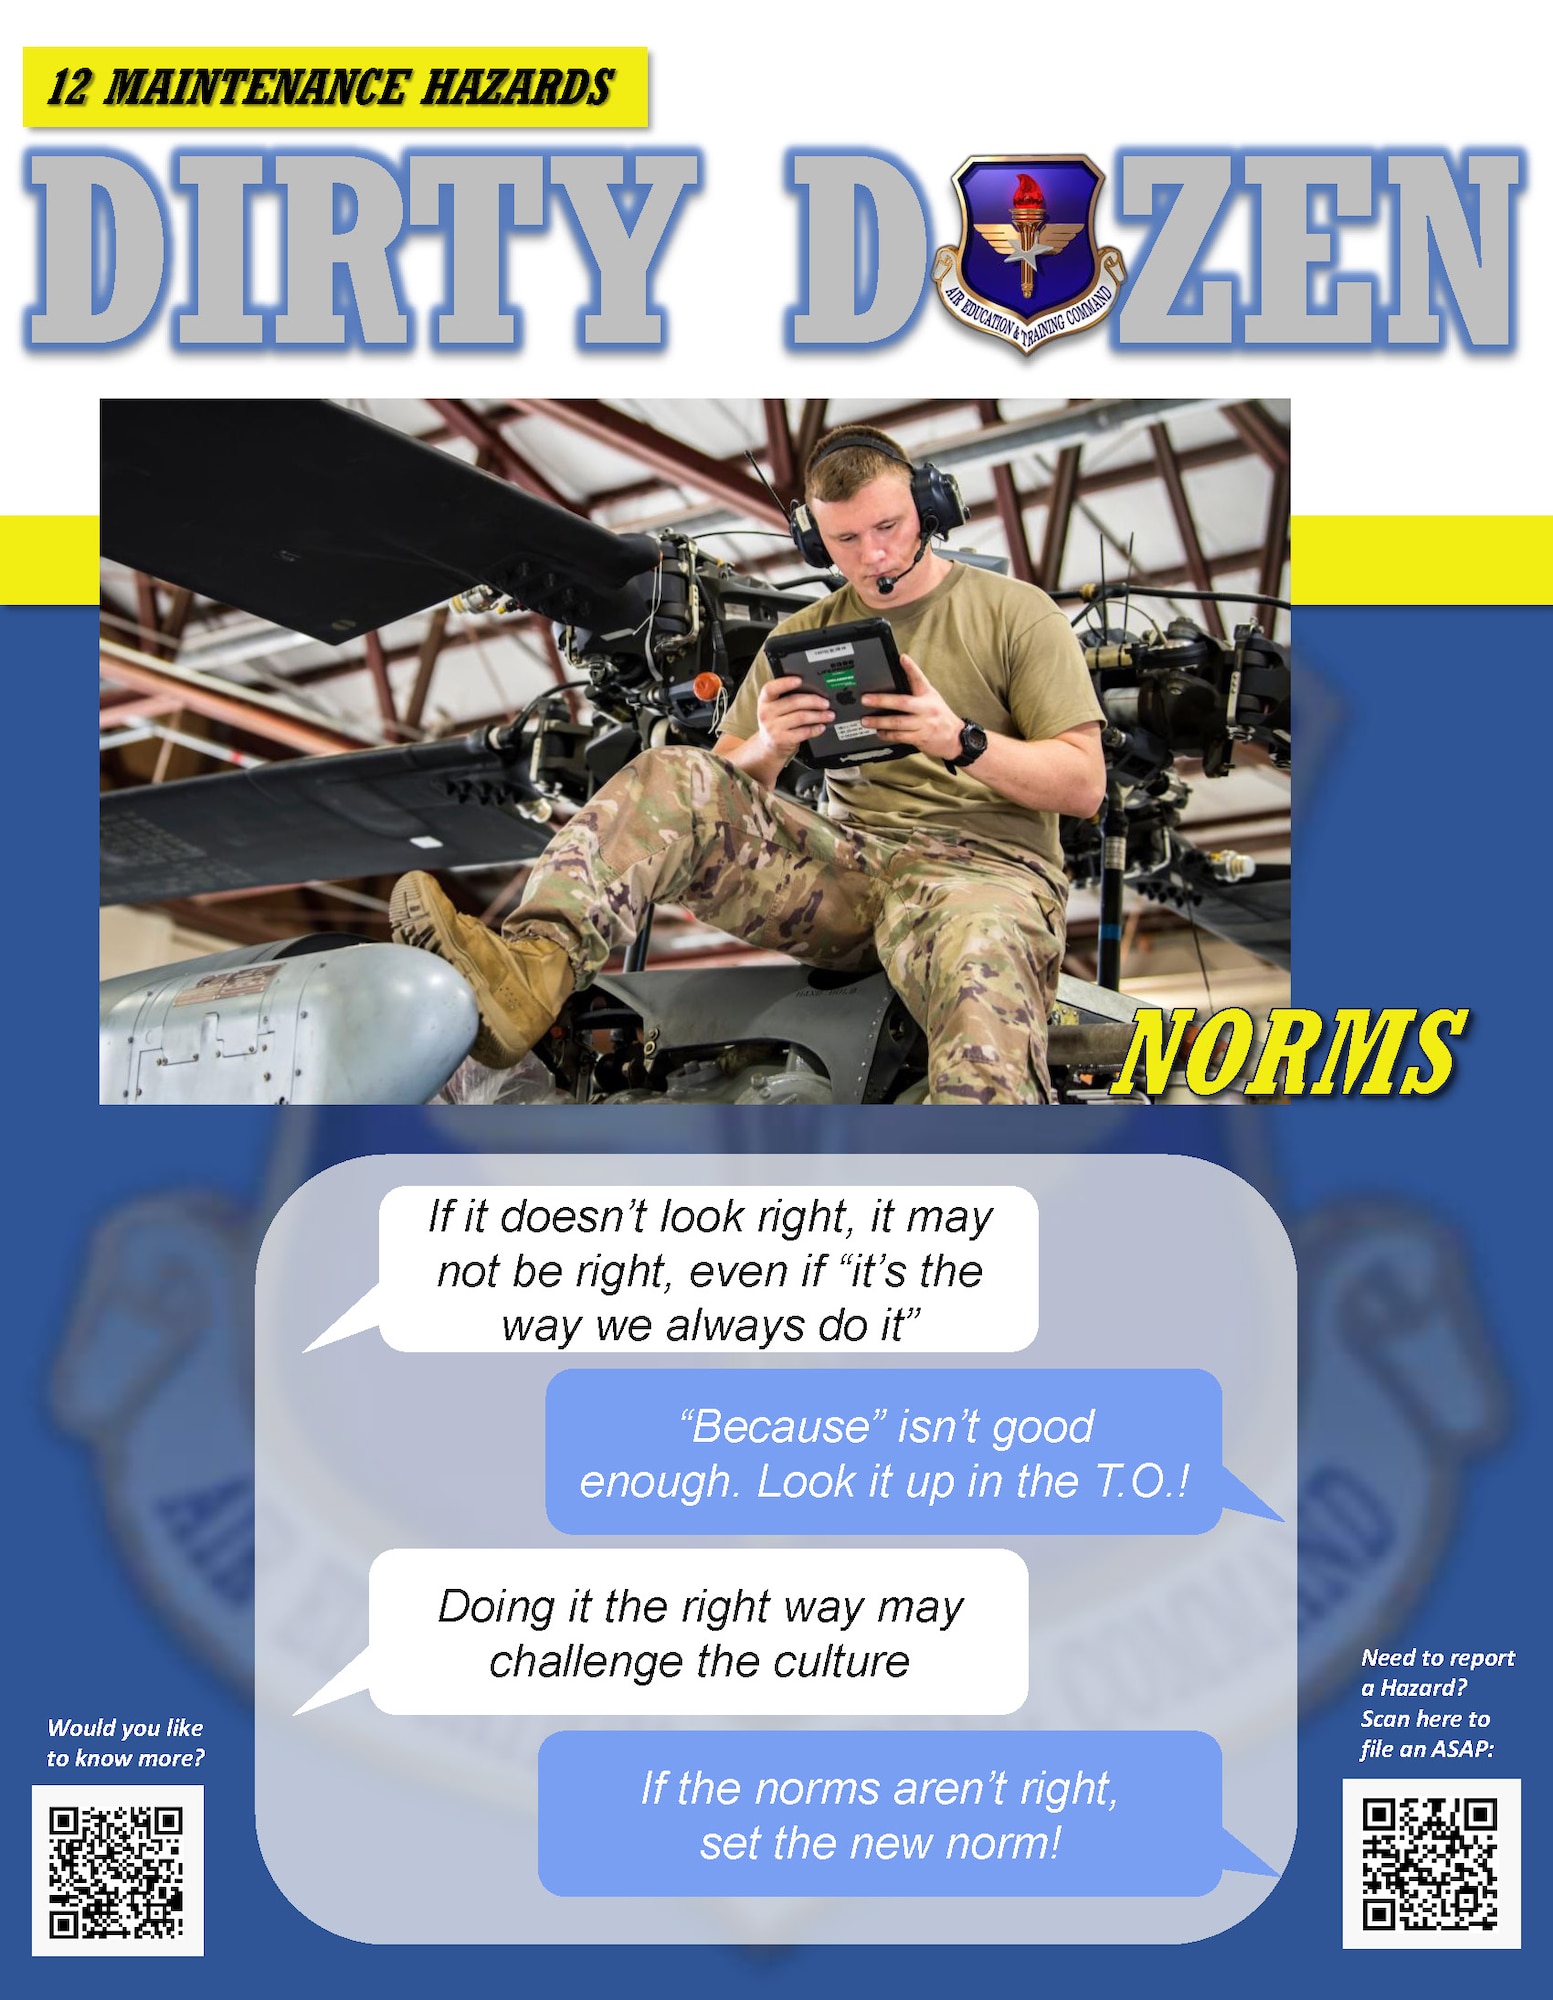 Norms is one of the Dirty Dozen, which highlights common human error factors in aircraft maintenance mishaps.